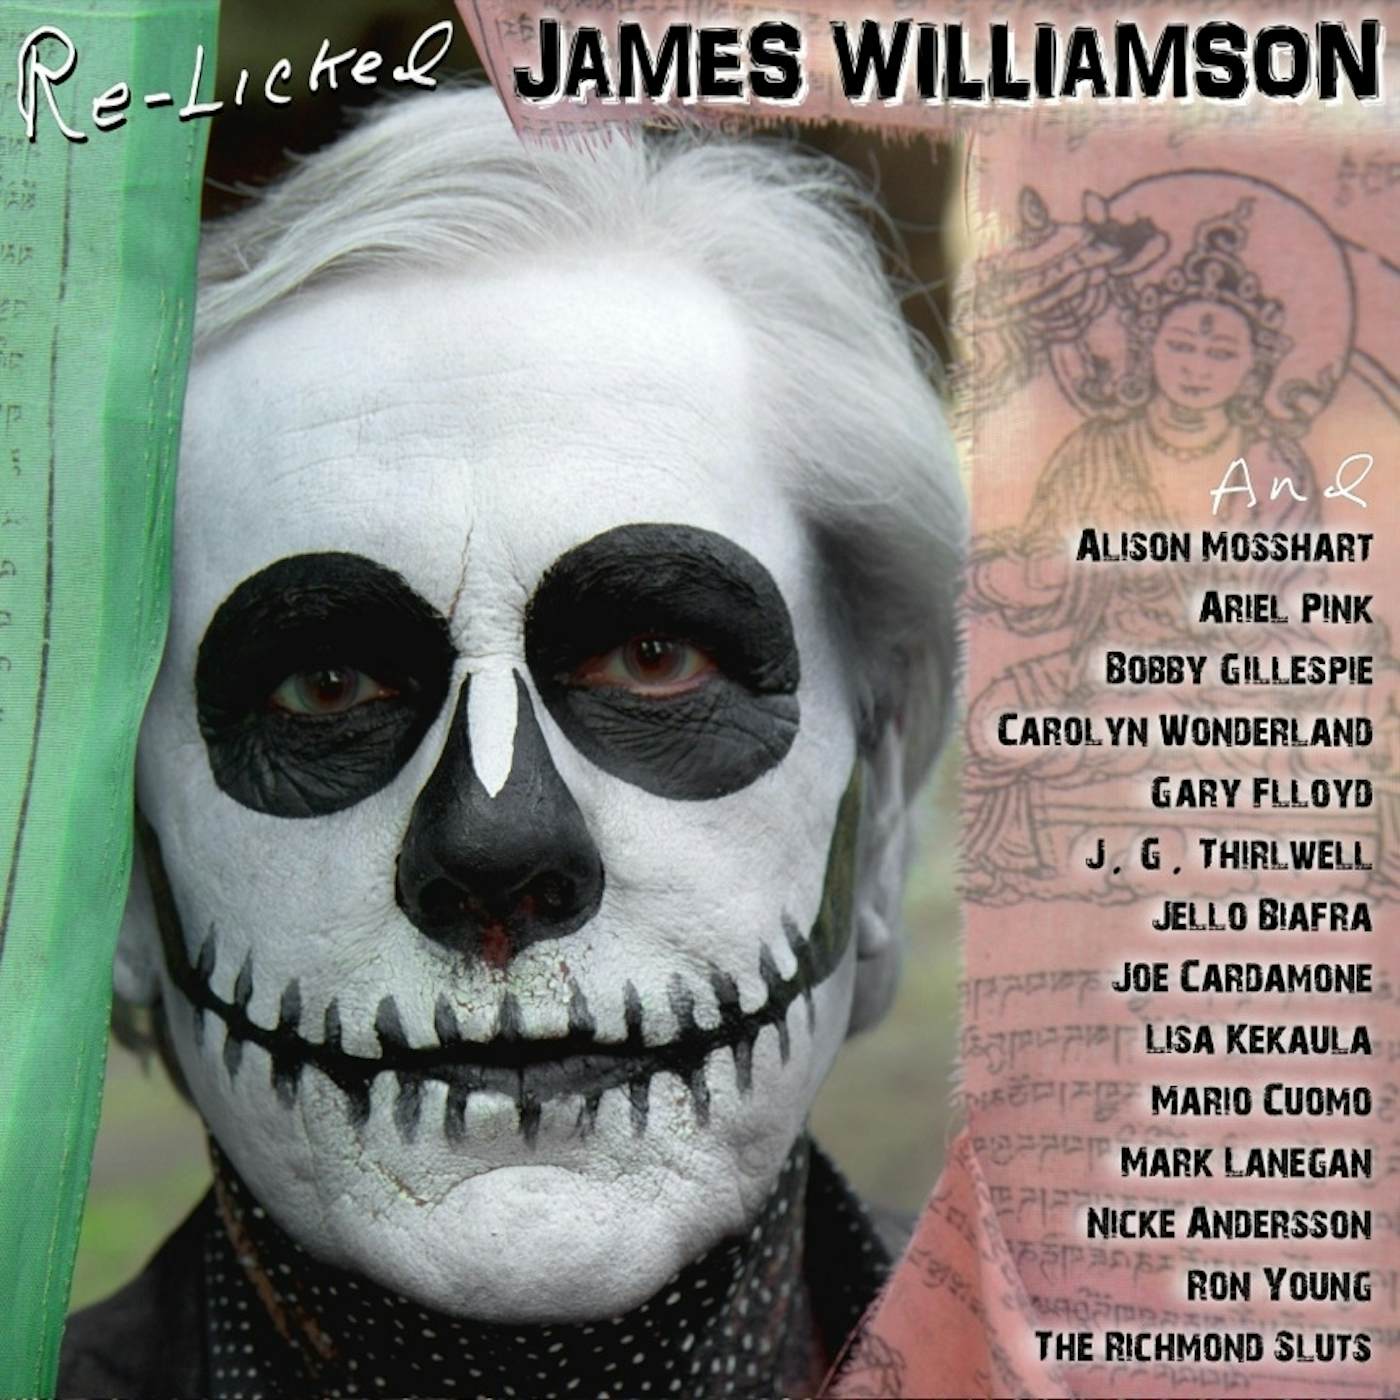 James Williamson RE-LICKED CD